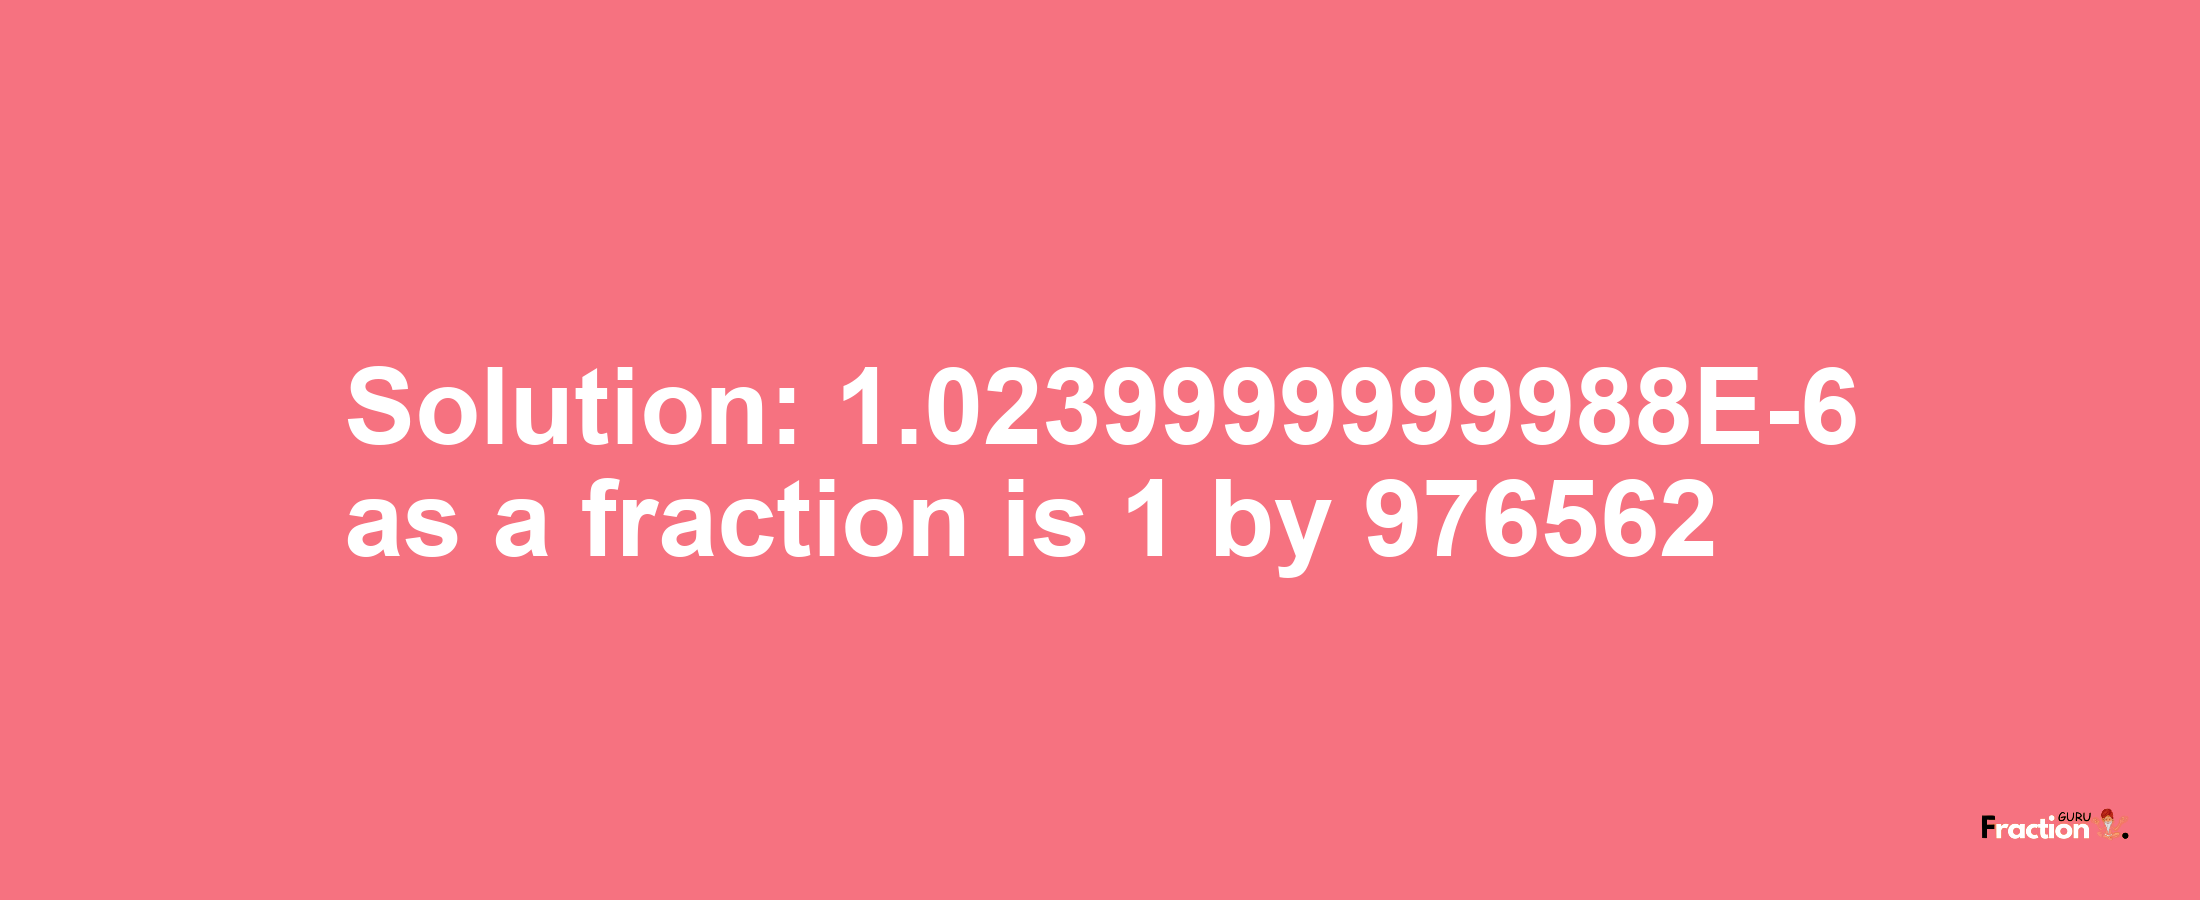 Solution:1.0239999999988E-6 as a fraction is 1/976562